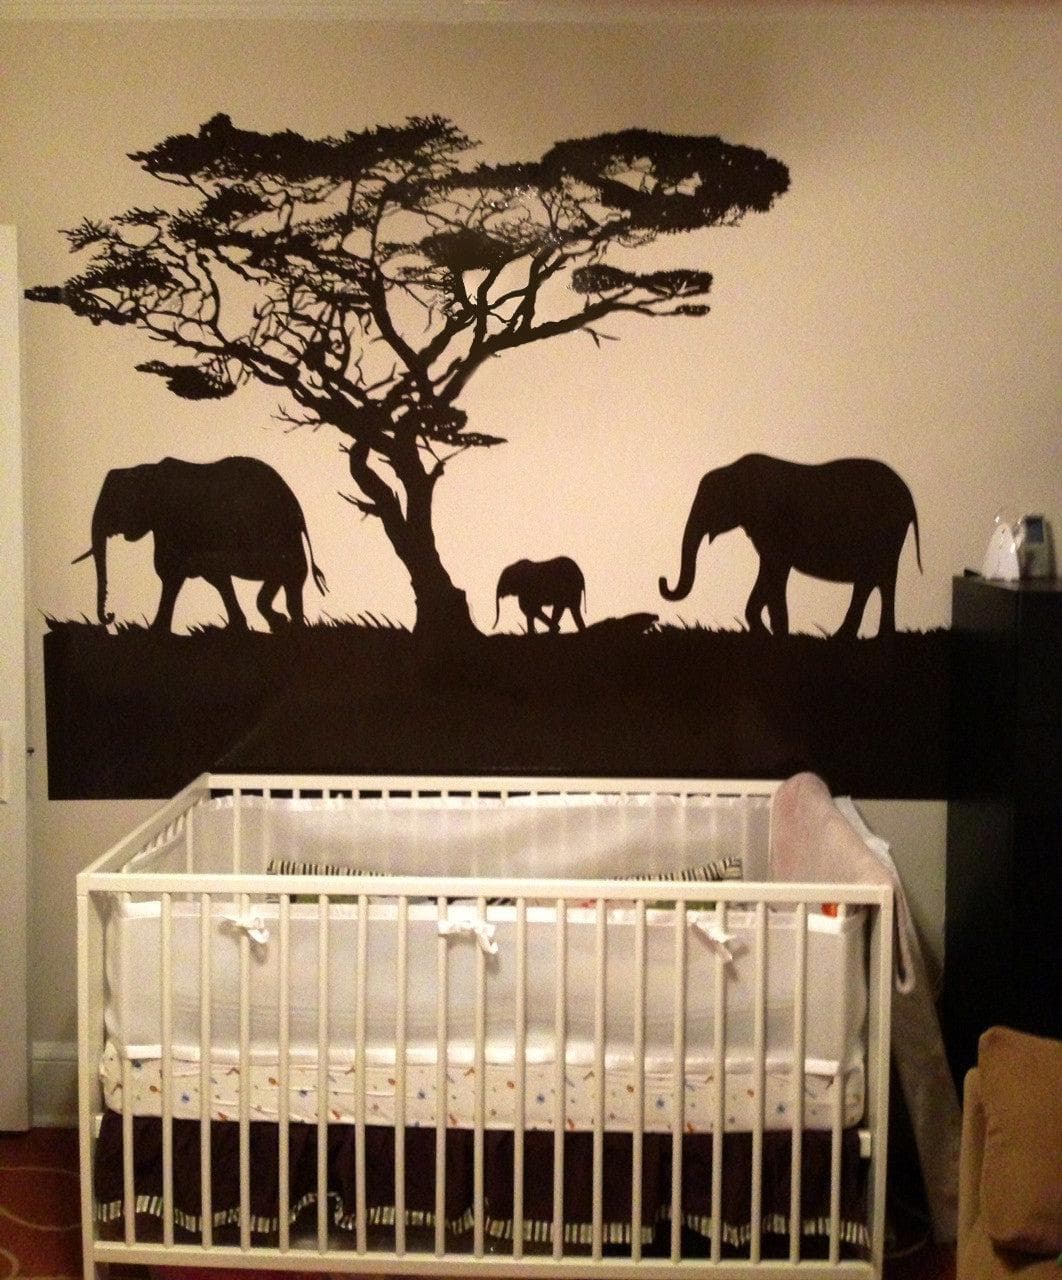 African Safari Theme Wall Decal Sticker. Elephant Family Migration. #OS_AA104